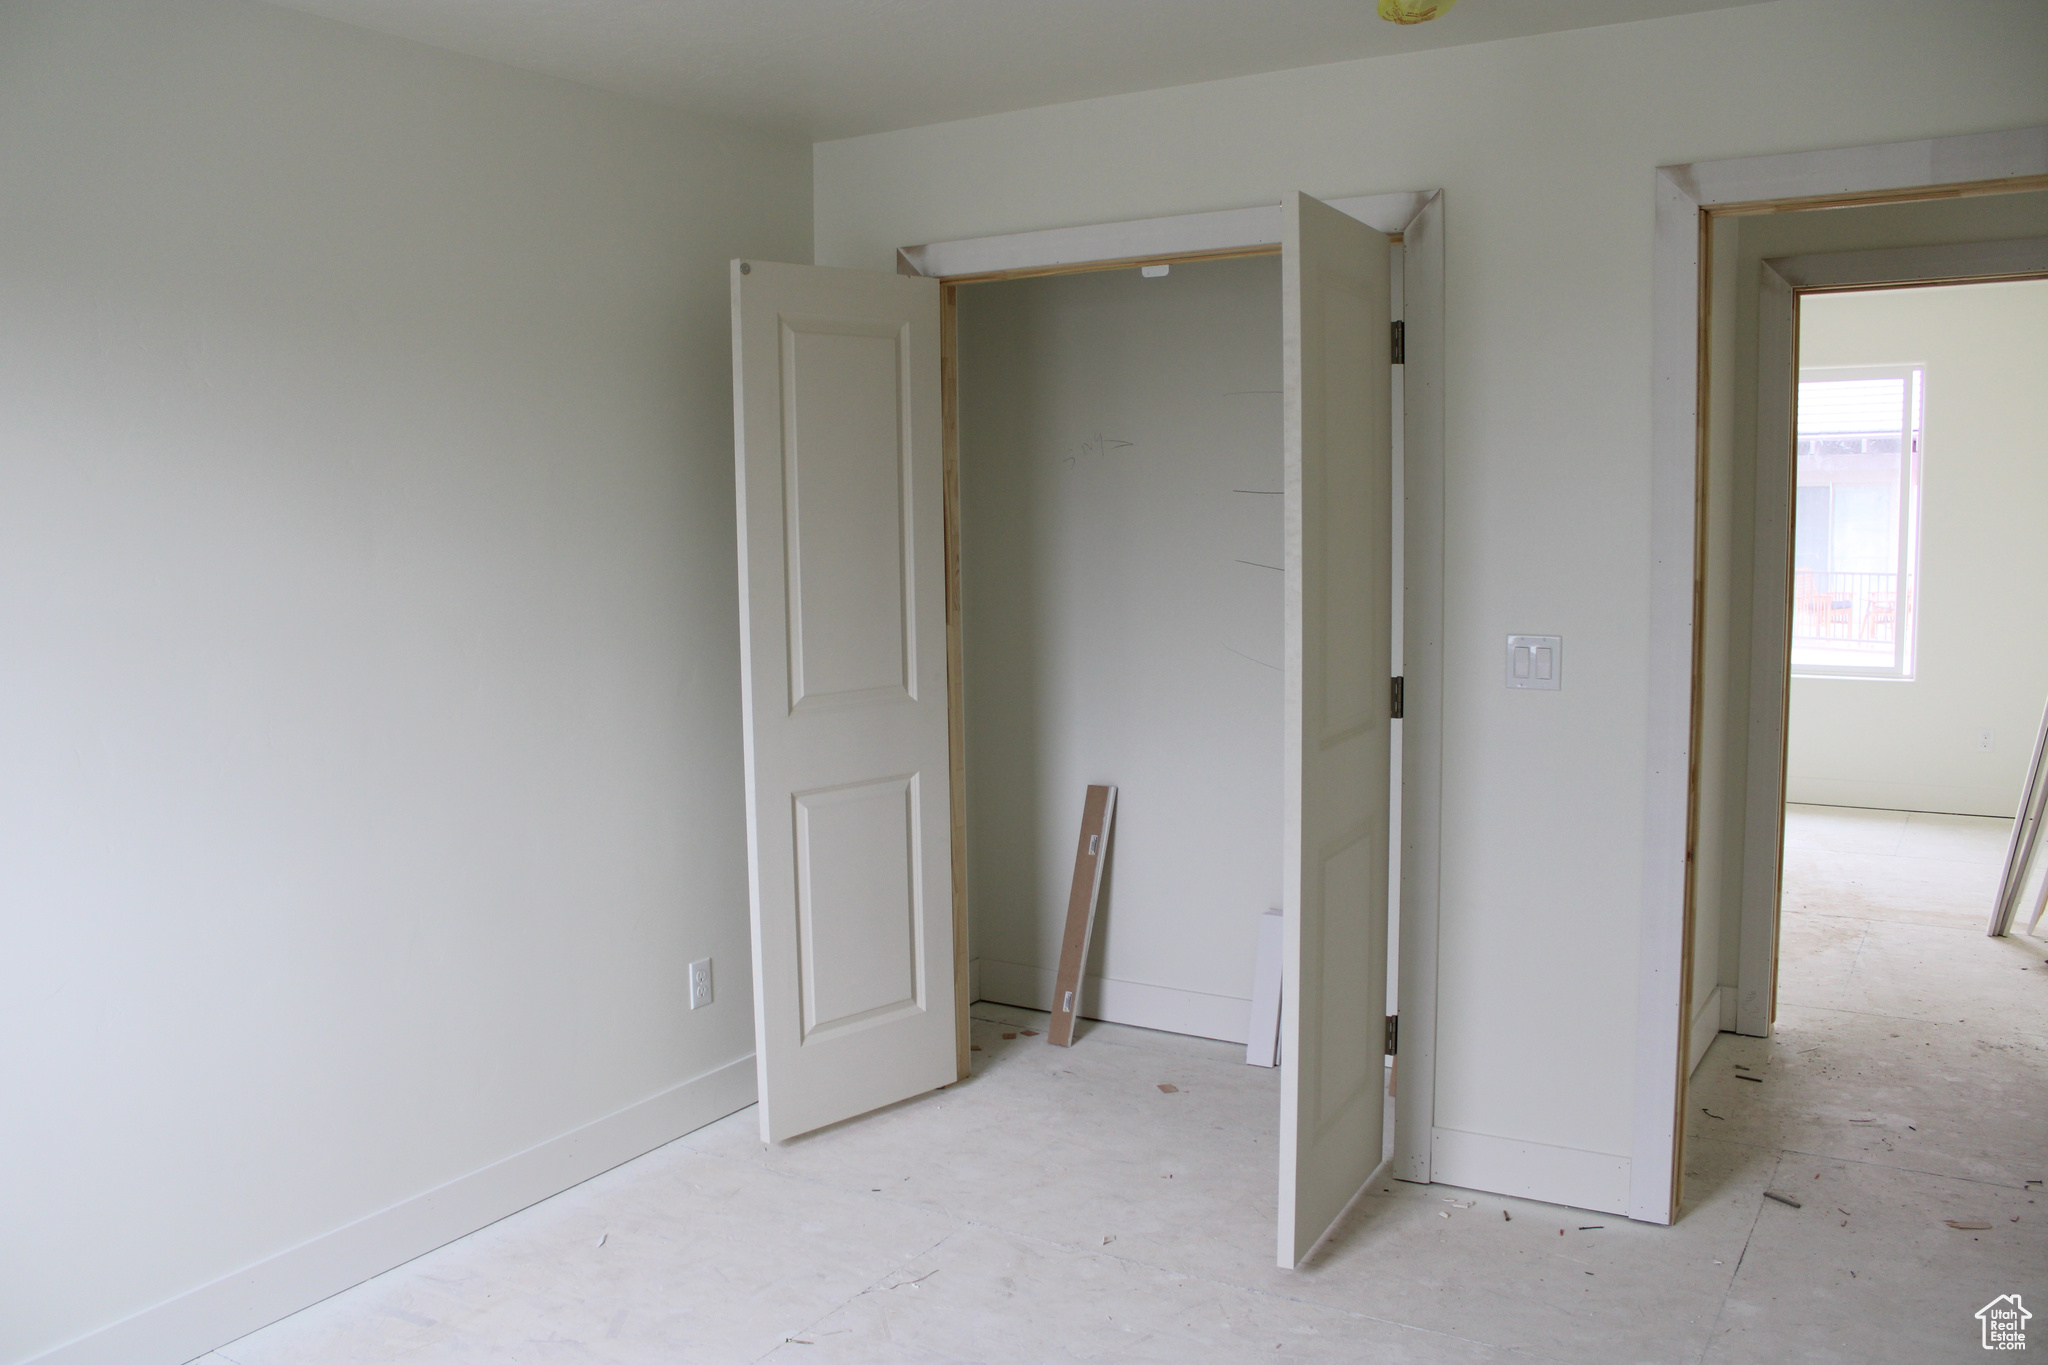 Closet will have Shelf & Hanging Rod in Bedroom 4